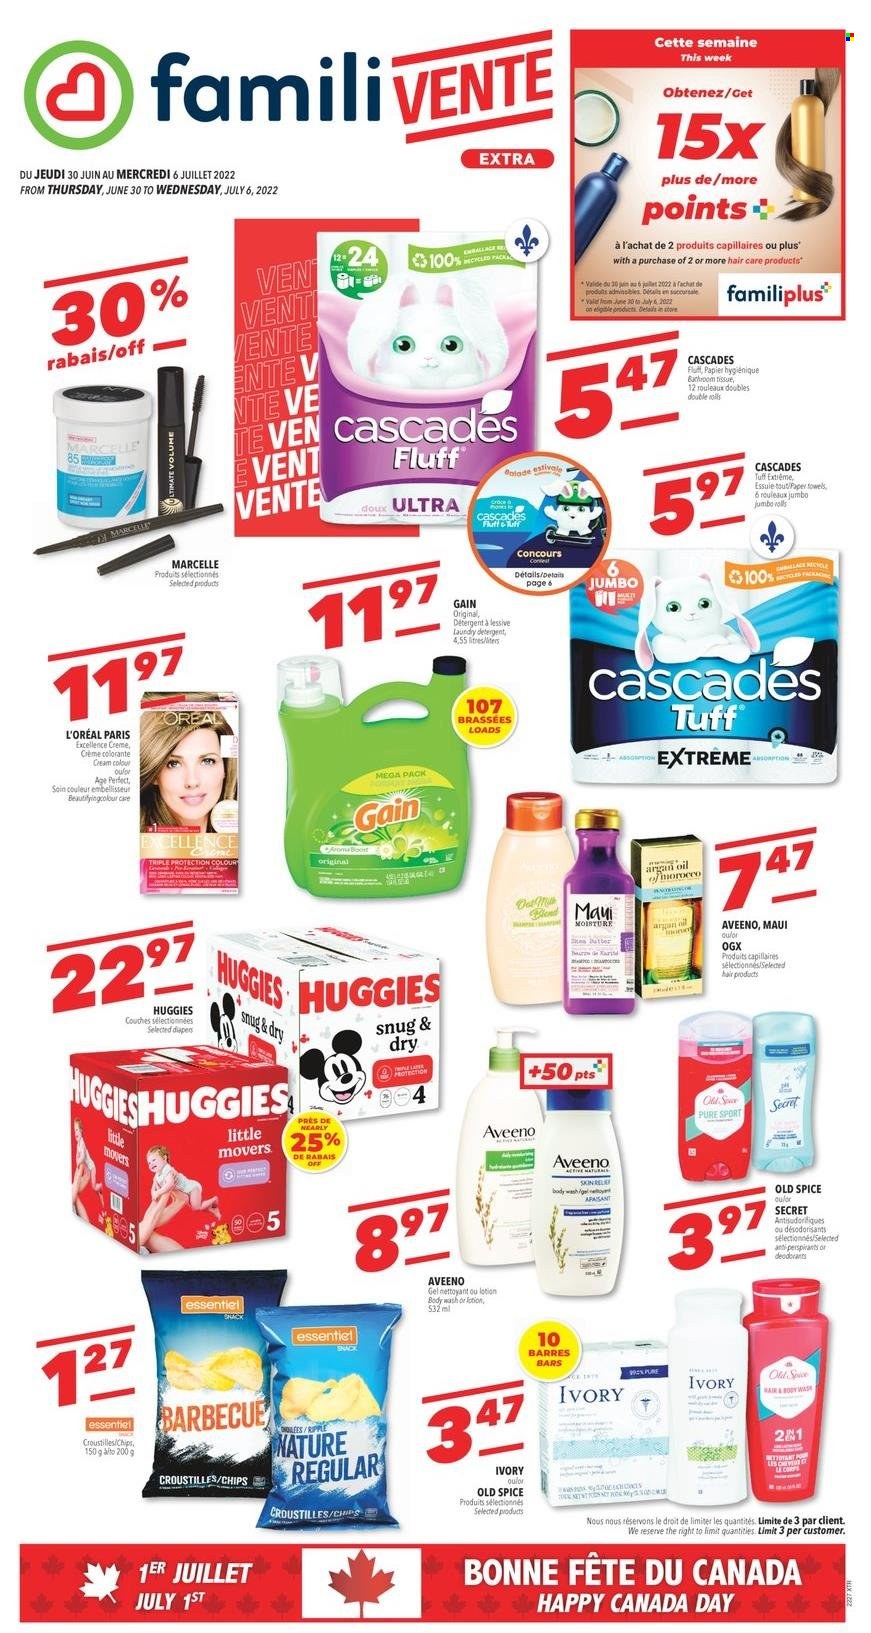 thumbnail - Familiprix Extra Flyer - June 30, 2022 - July 06, 2022 - Sales products - snack, chips, spice, Boost, Aveeno, bath tissue, kitchen towels, paper towels, Gain, laundry detergent, body wash, L’Oréal, OGX, body lotion, argan oil, detergent, Huggies, Old Spice, deodorant. Page 1.